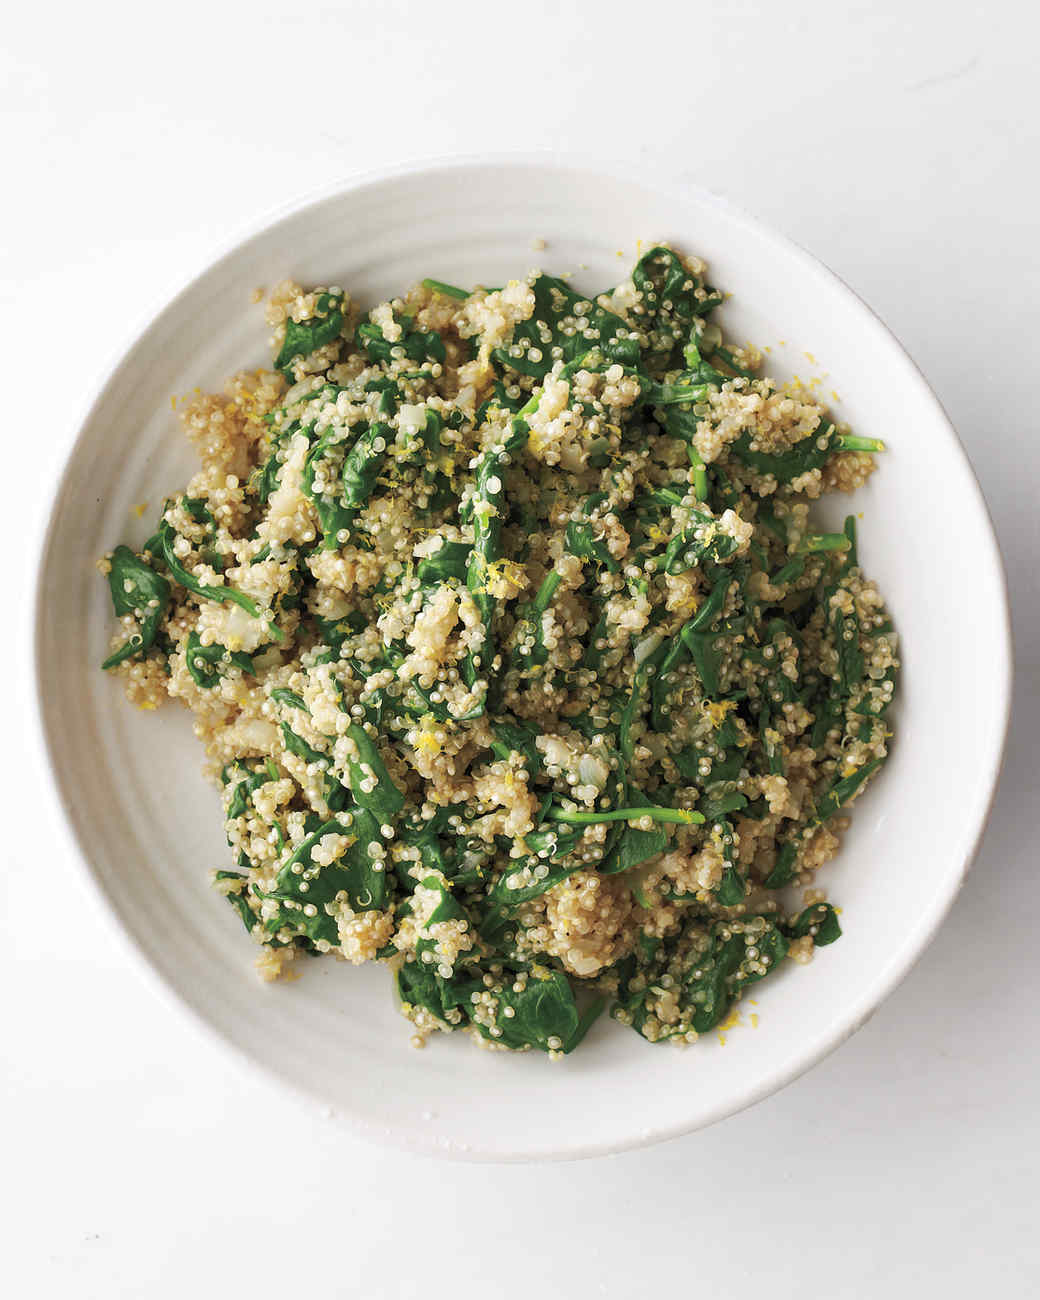 Spinach Recipes for Every Meal